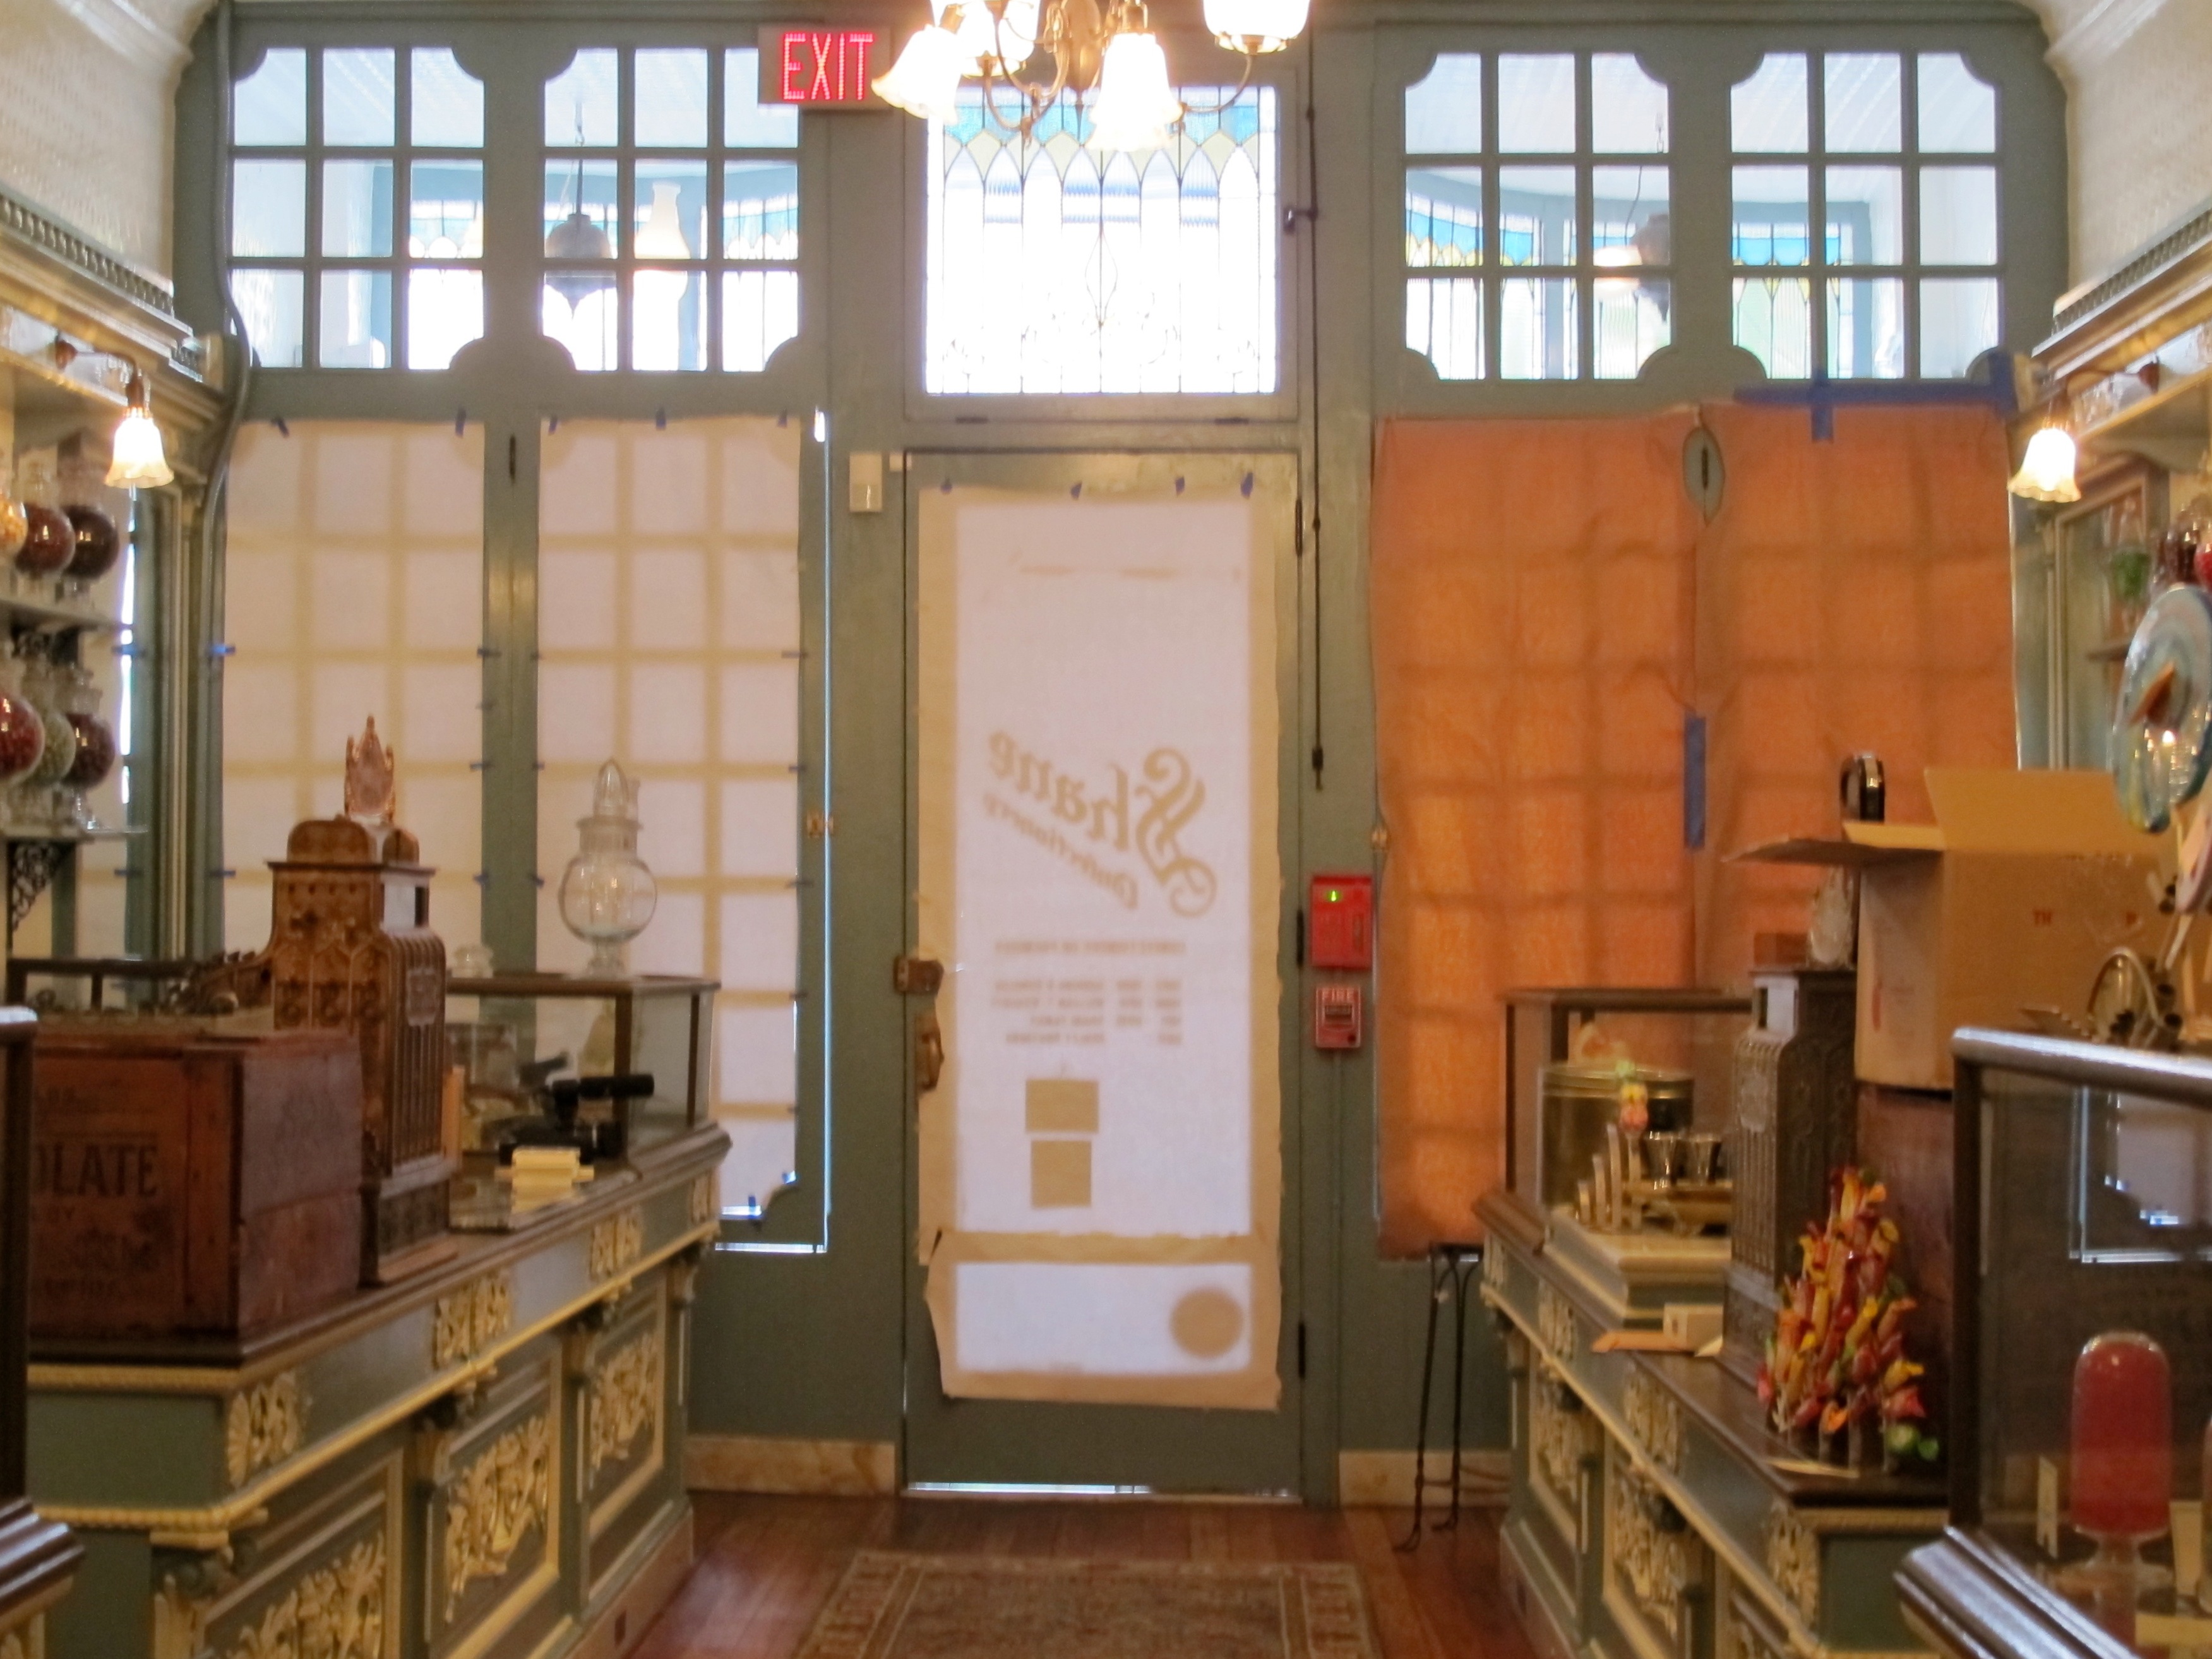 Shane, a Philadelphia candy institution dating back to 1863, reopens this month